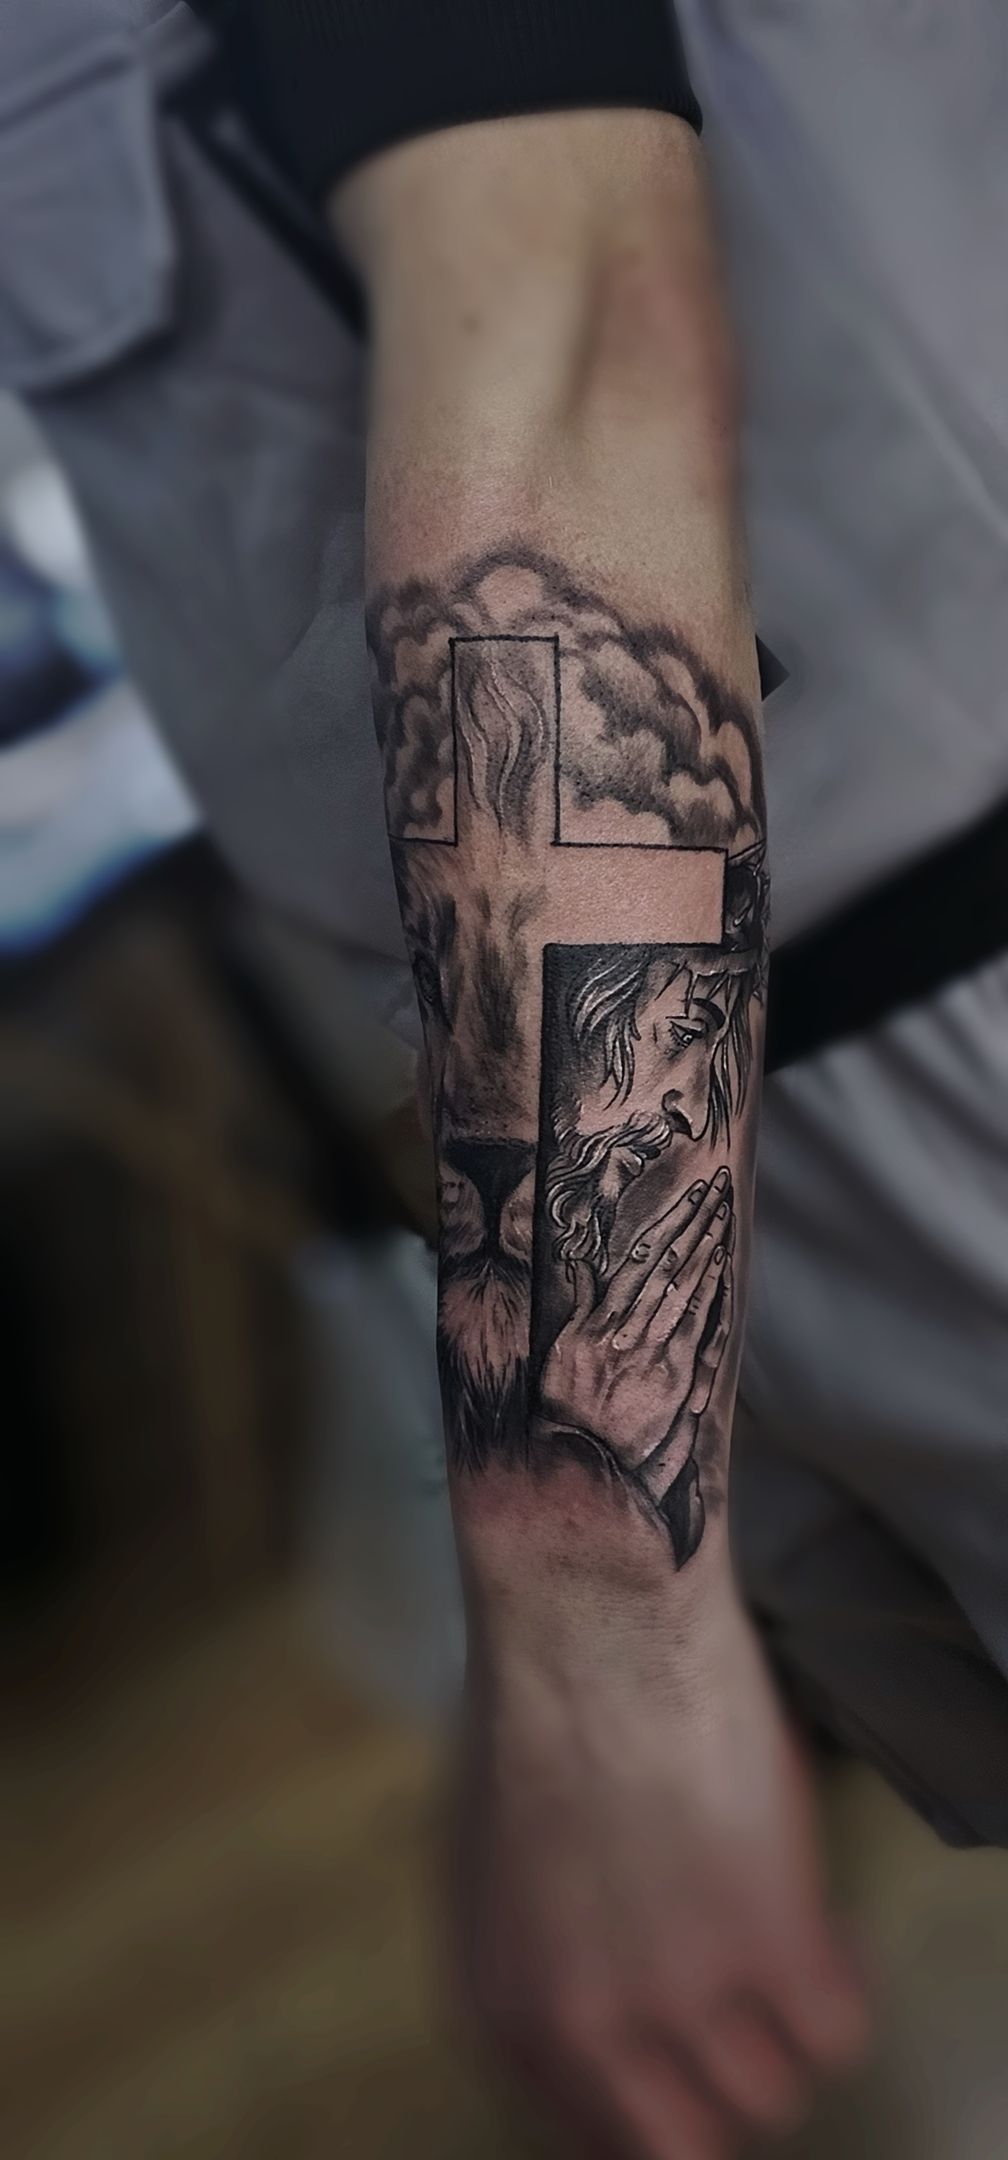 Sleeve tattoo - Visions Tattoo and Piercing